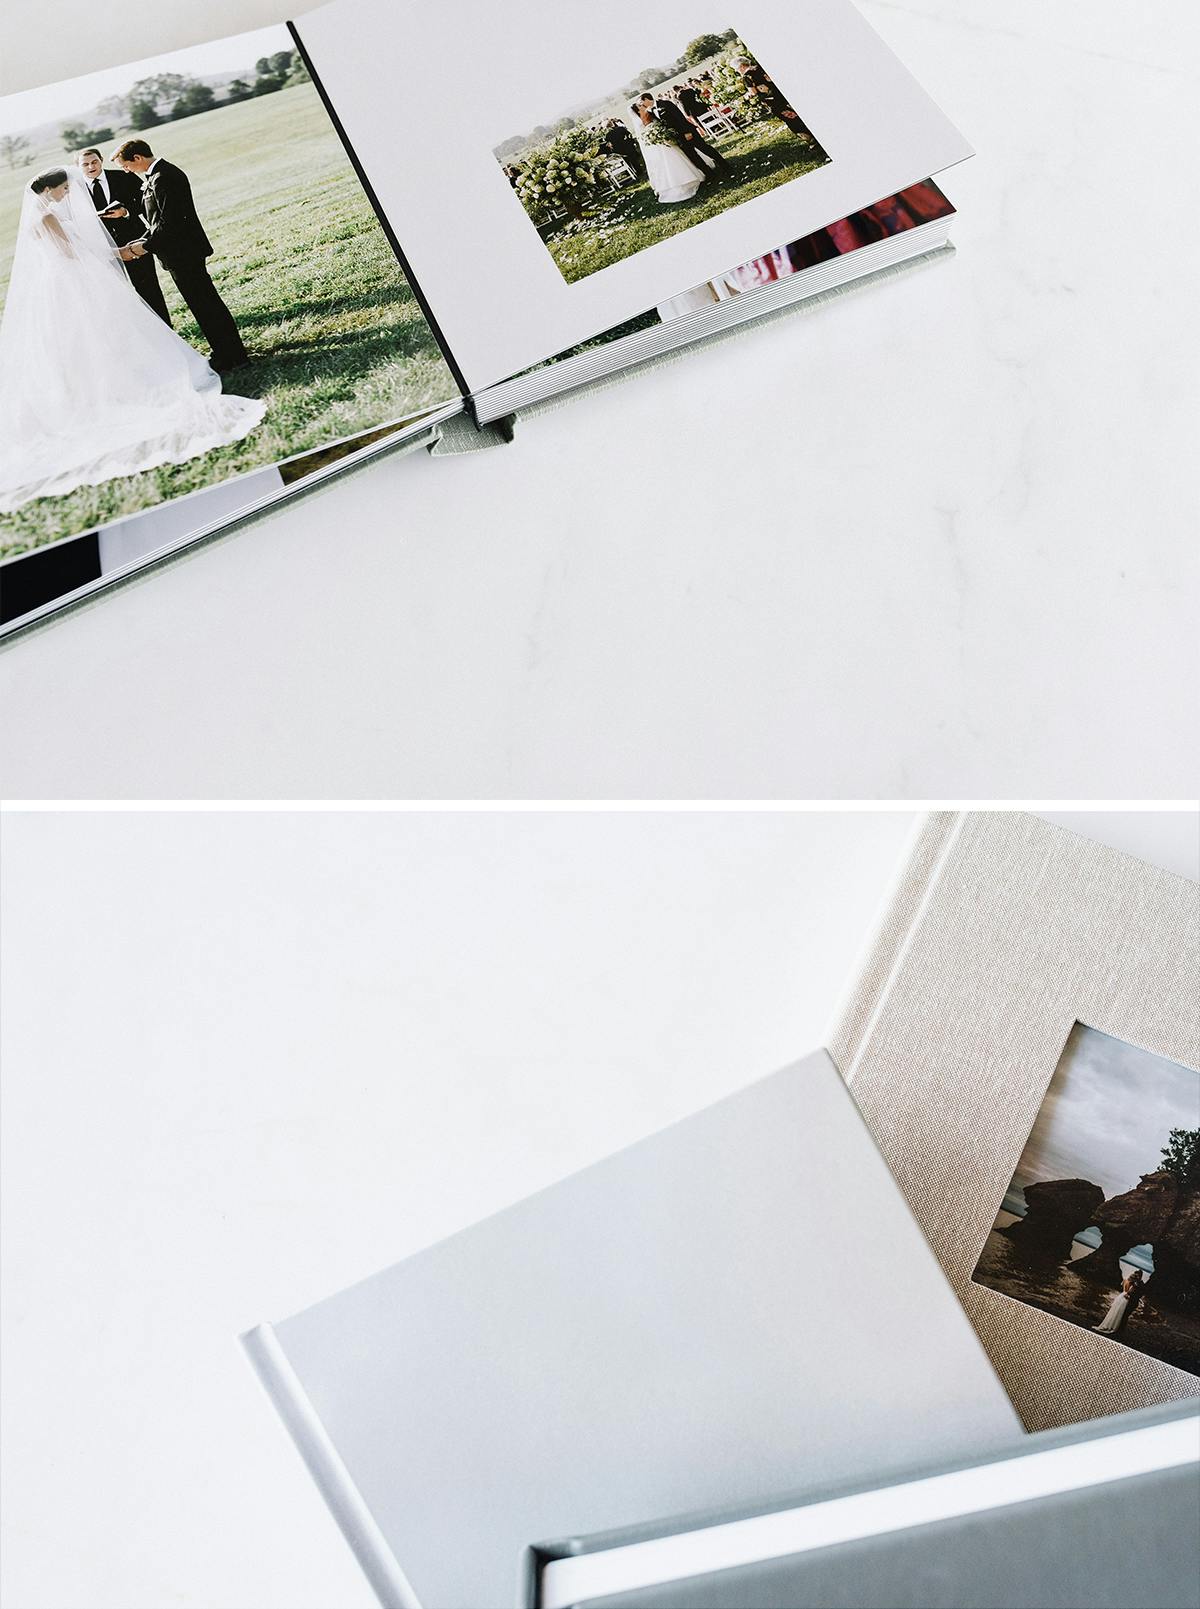 Sample photo album to increase album and print sales as a photography business